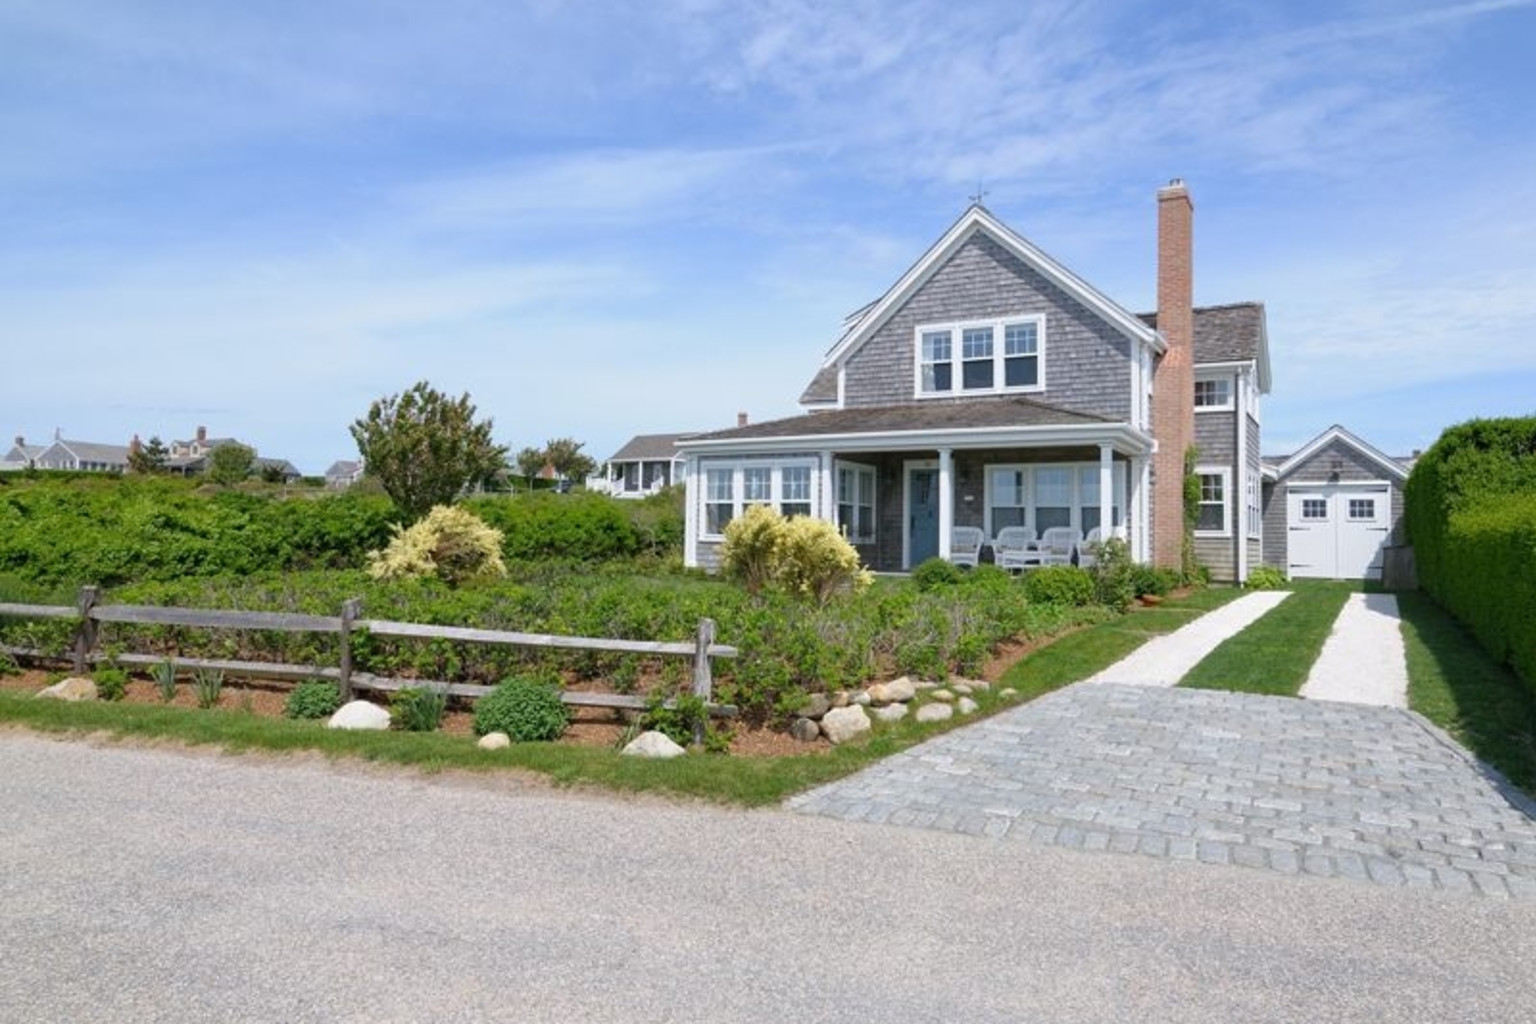 The Cottage 3 Bedroom Vacation Cottage Rental Town Of Nantucket